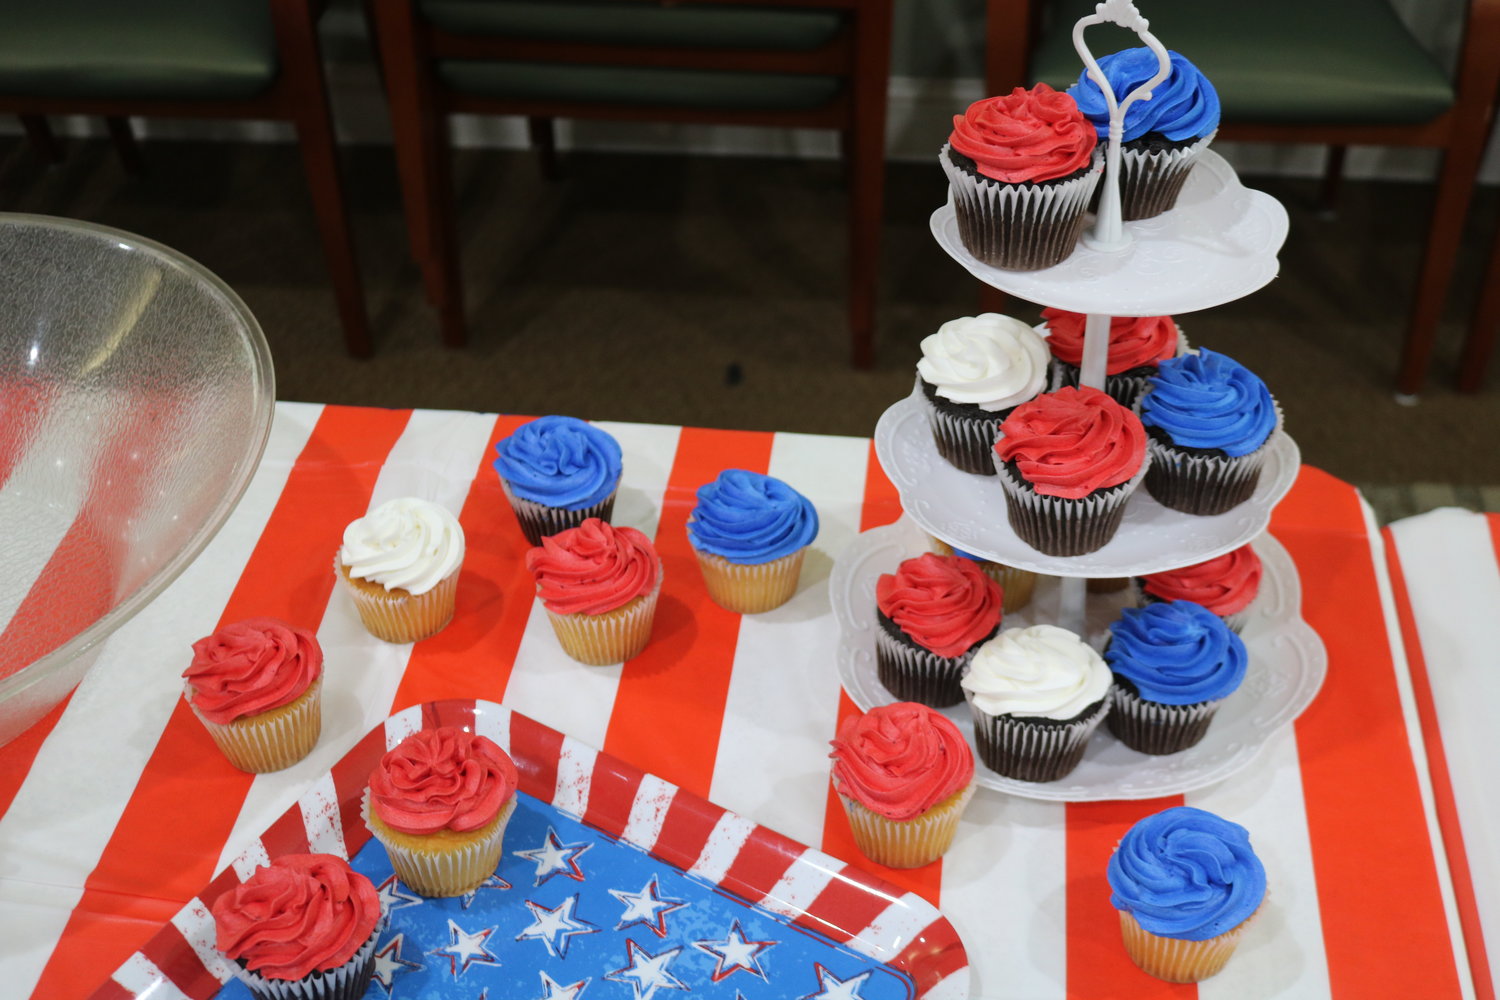 Patriotic cupcakes were among the treats offered to attendees for THE PLAYERS Community Senior Center reopening open house.